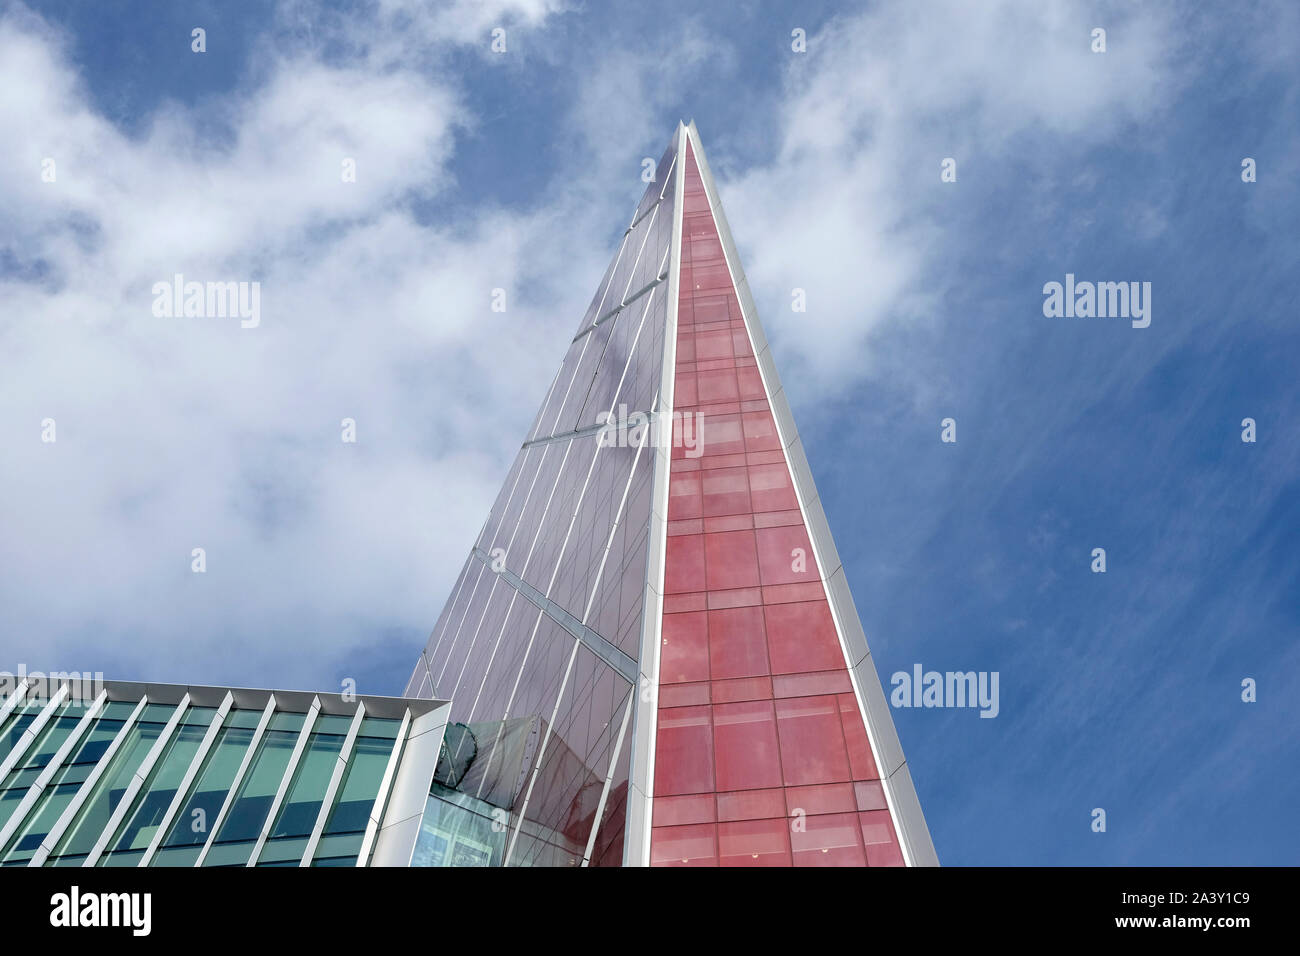 A close up view of the Nova building in Victoria, London, UK Stock Photo